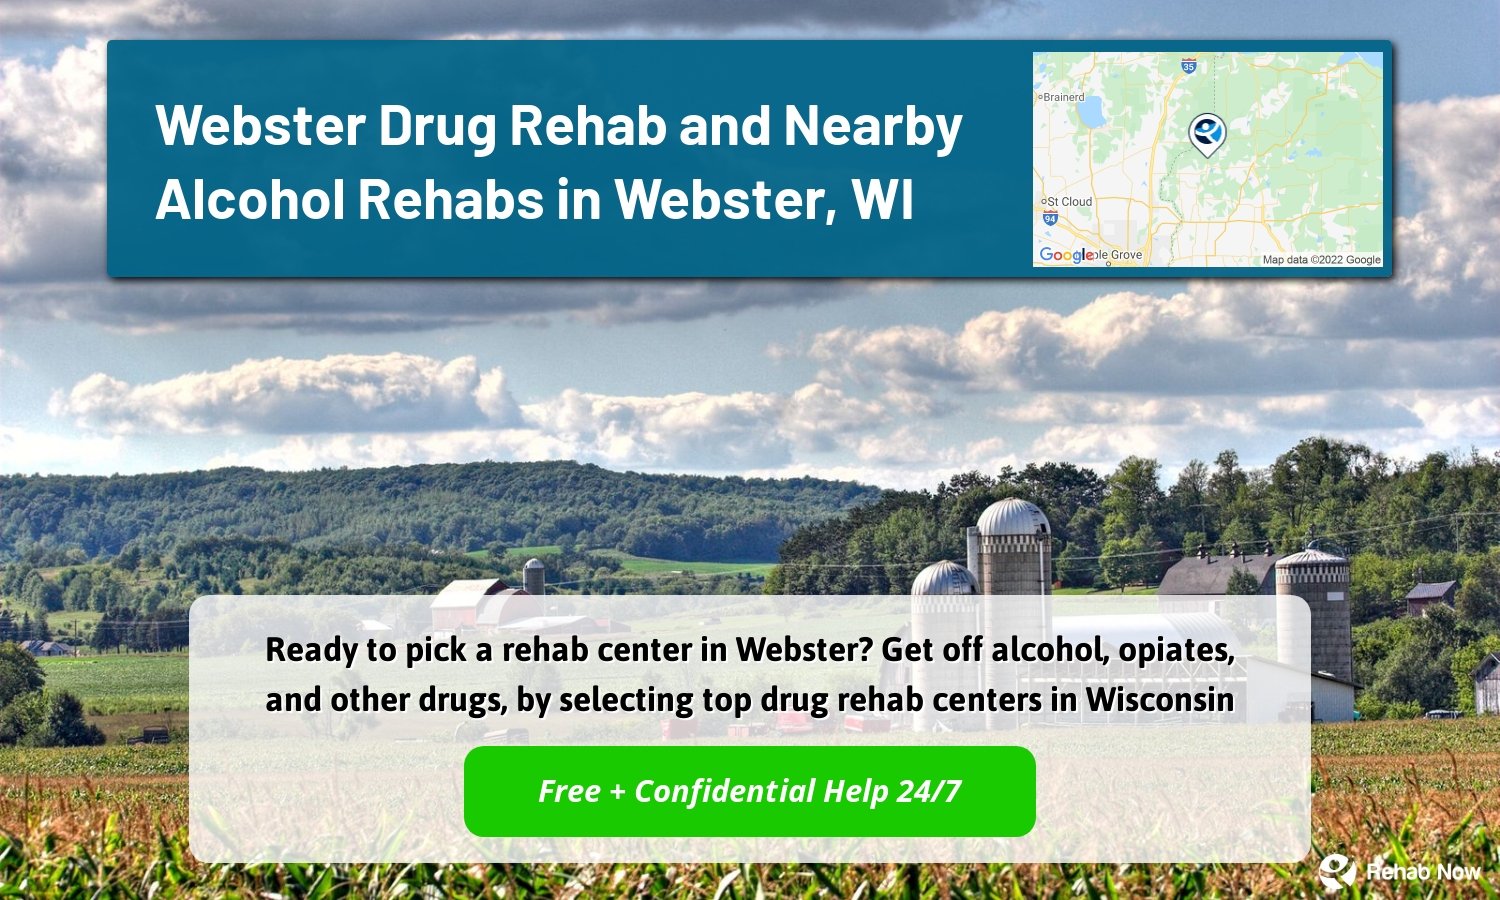 Ready to pick a rehab center in Webster? Get off alcohol, opiates, and other drugs, by selecting top drug rehab centers in Wisconsin